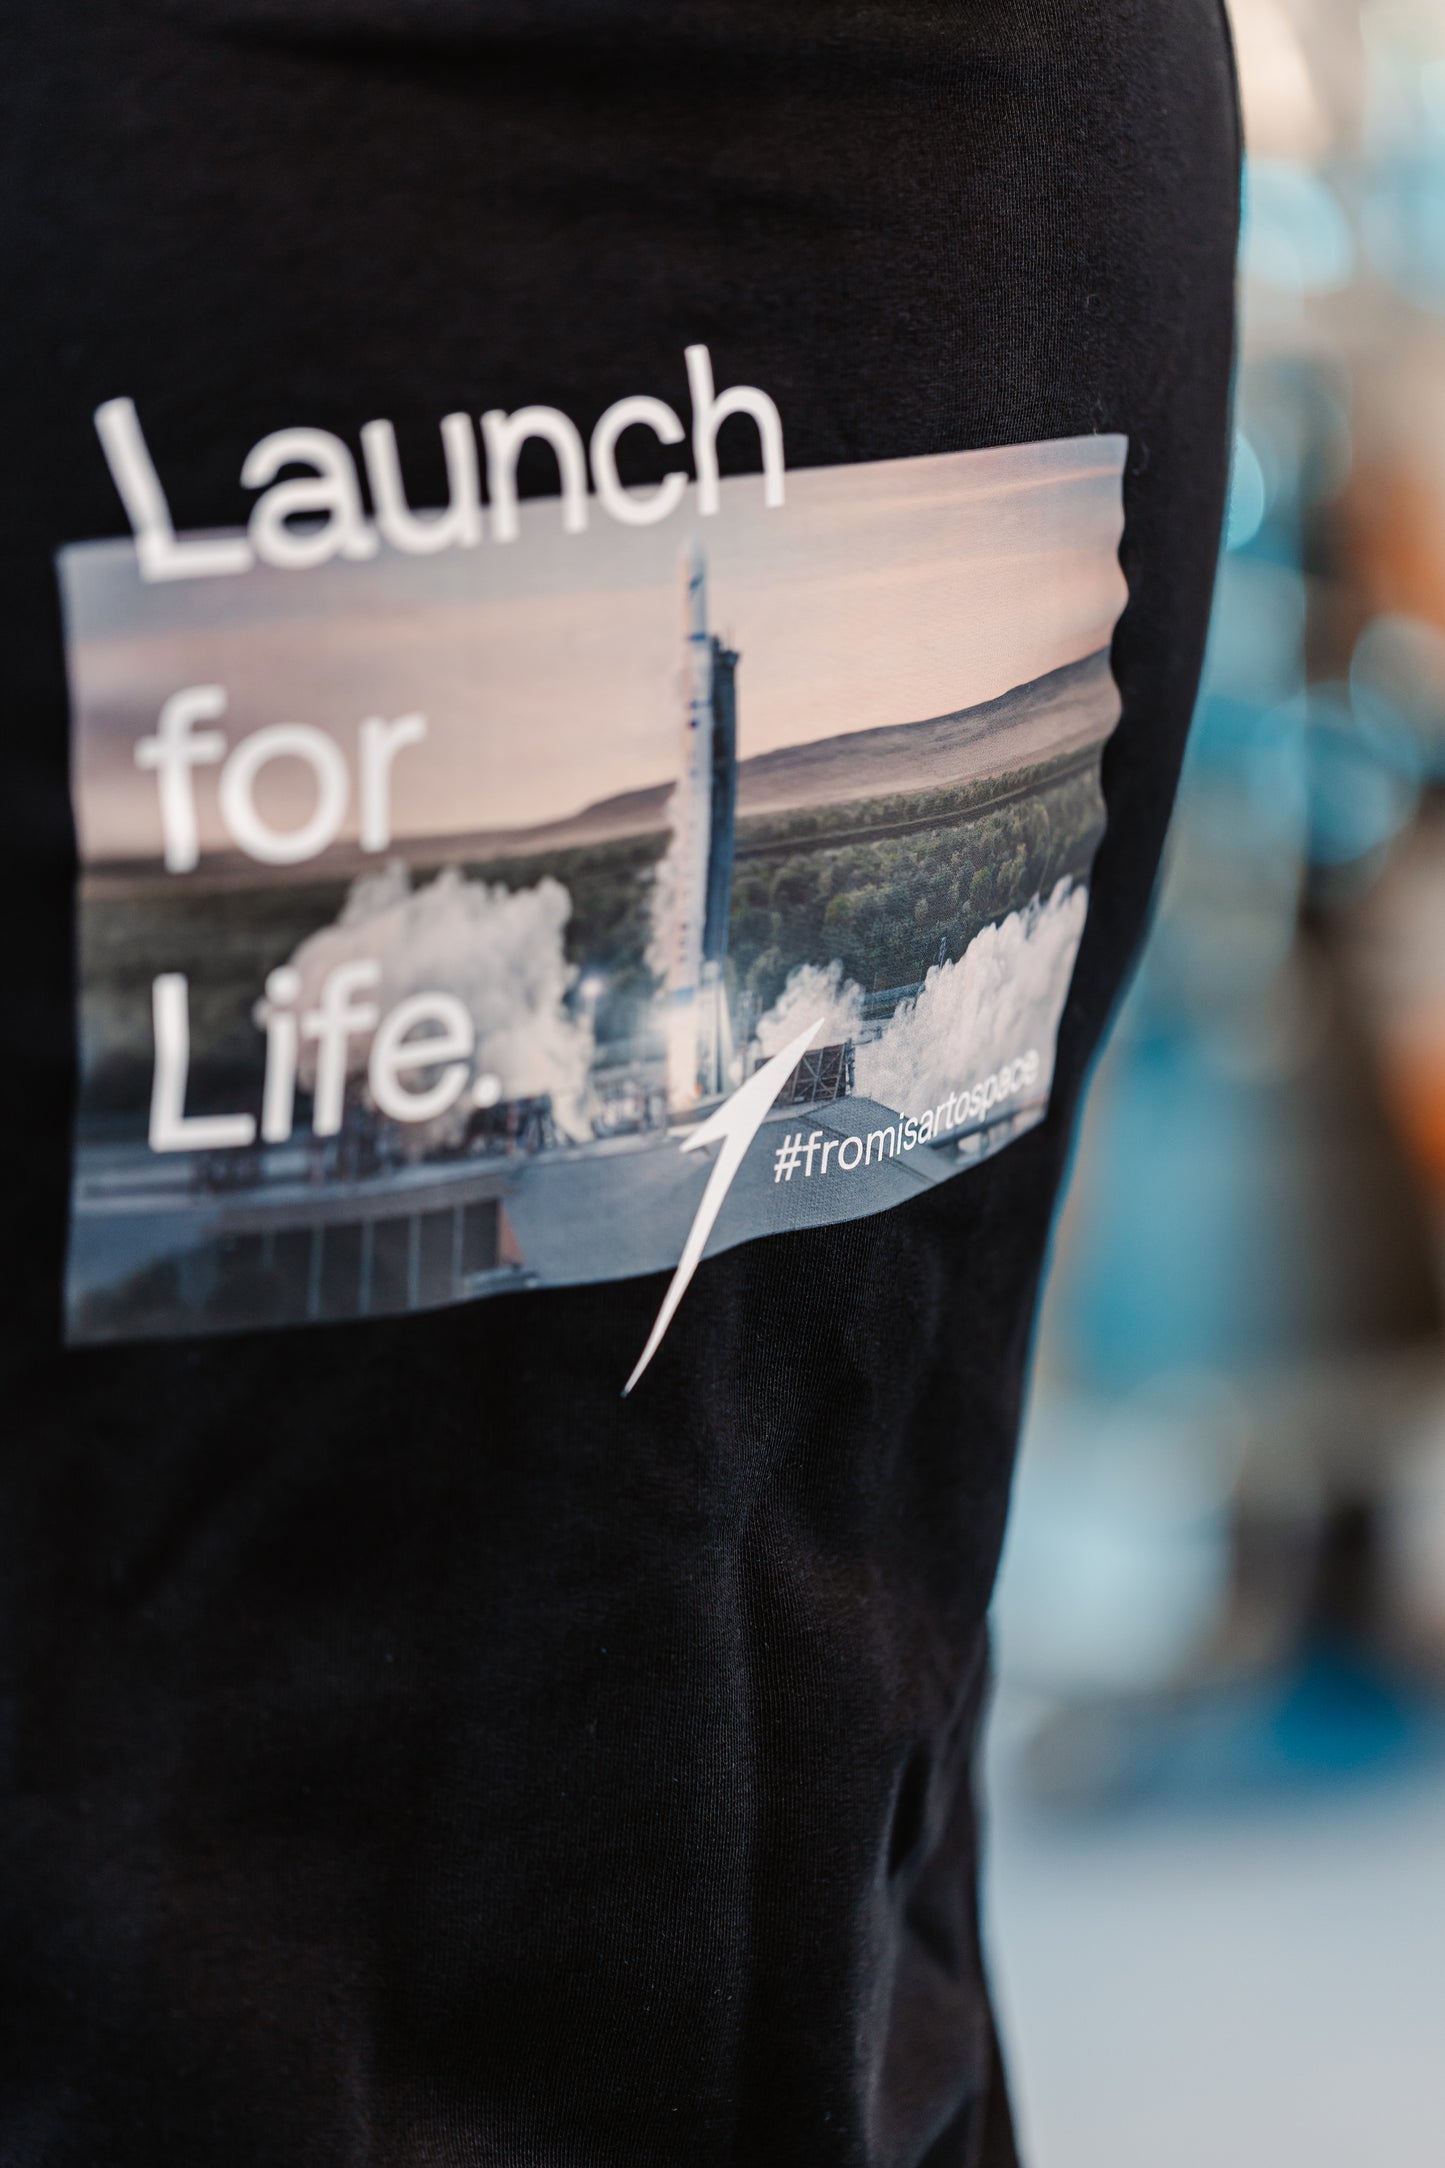 Women Hoodie Launch for Life